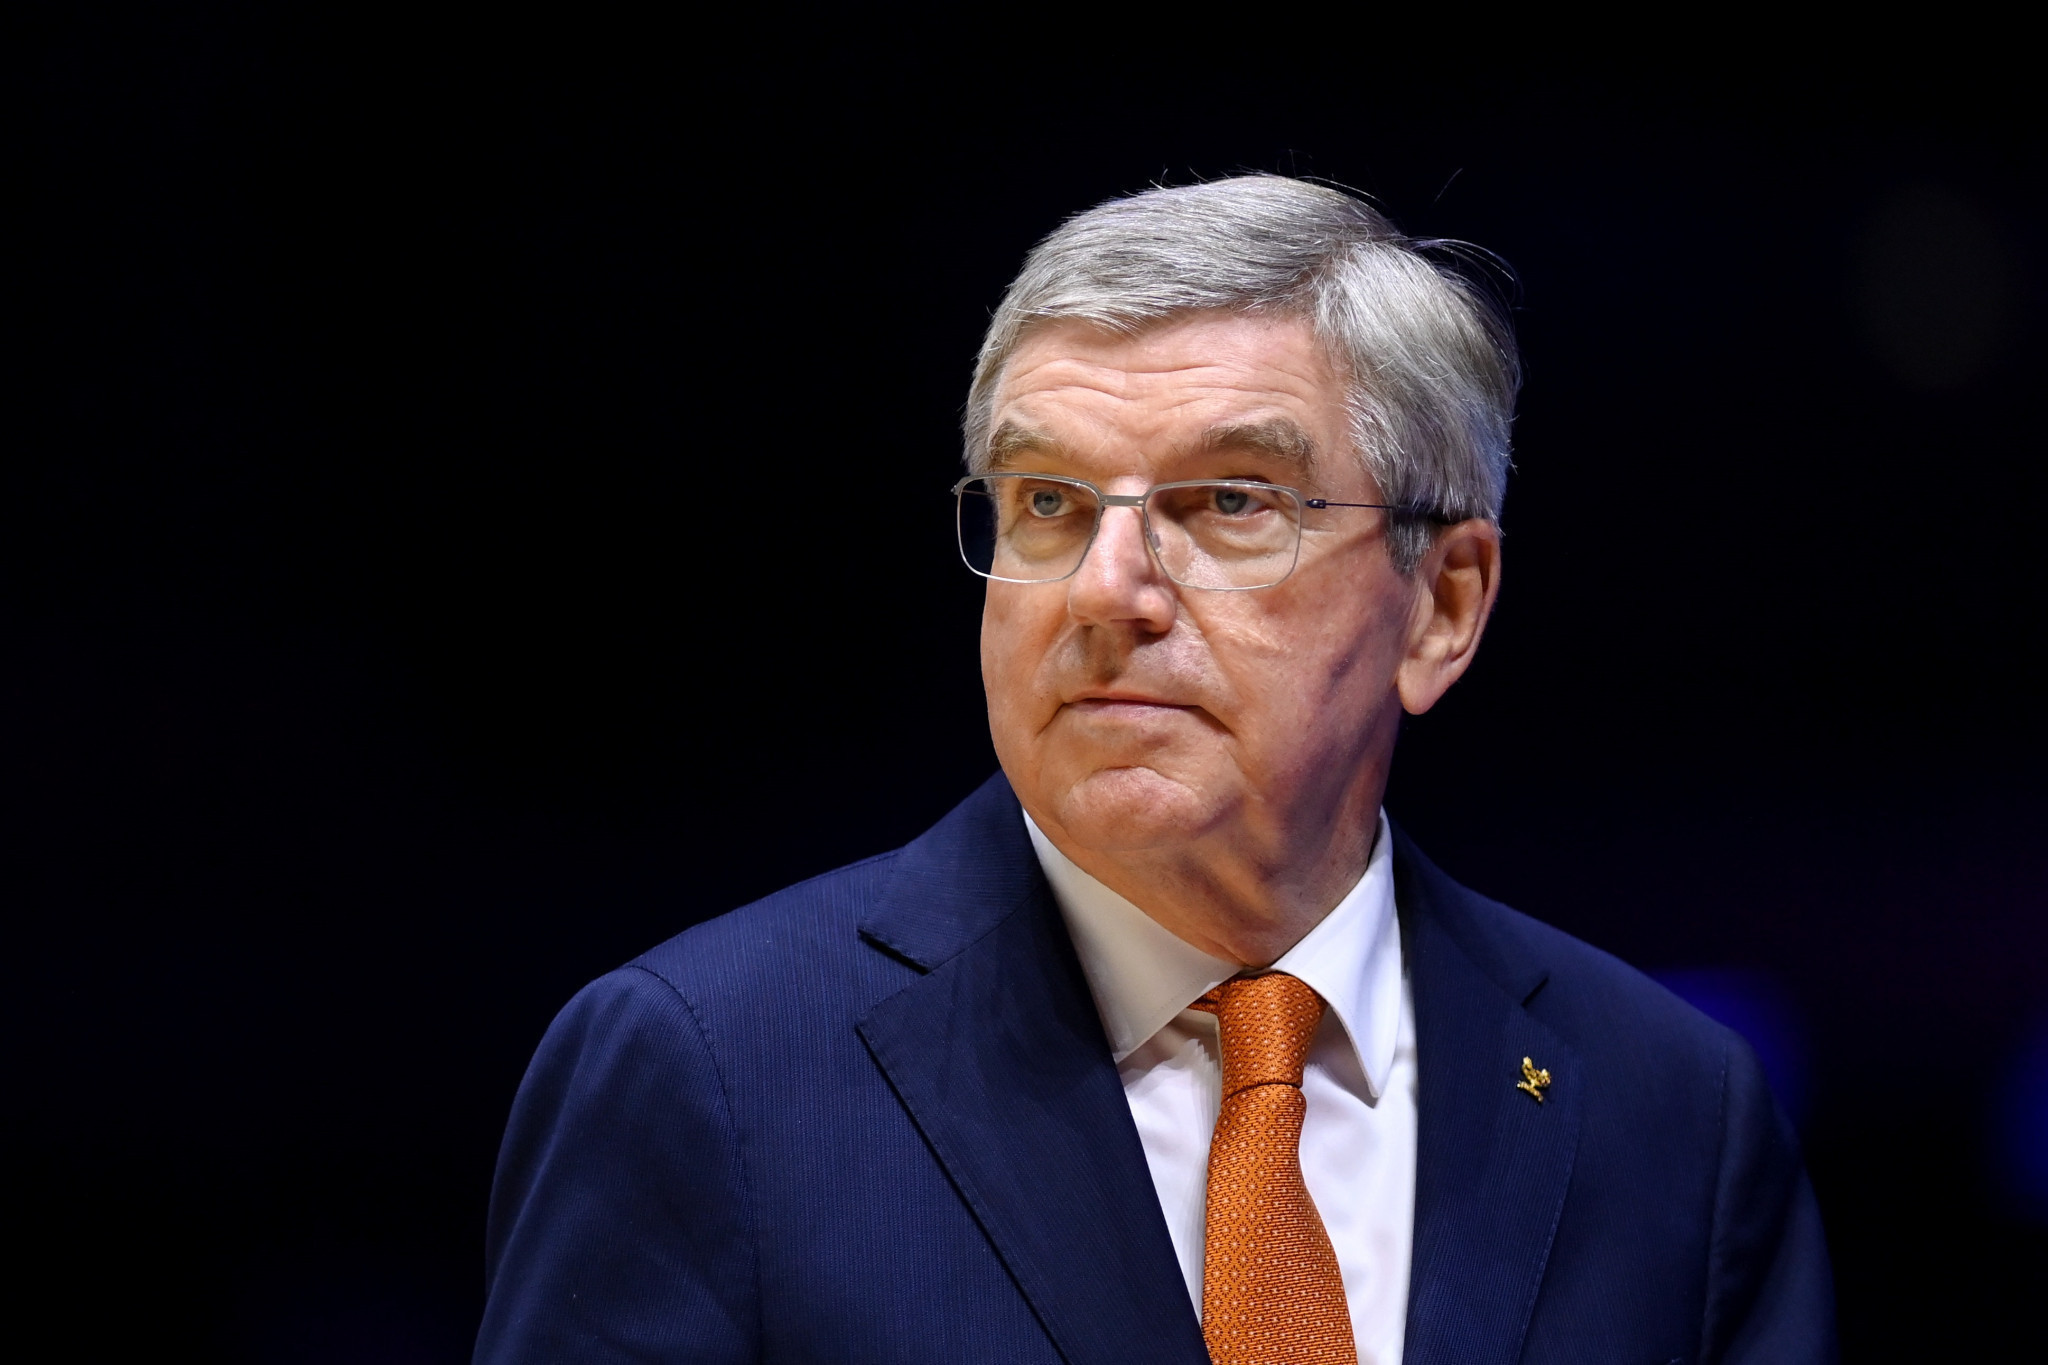 IOC President Thomas Bach has come under fire over his organisation's decision to consider readmitting Russian and Belarusian athletes under a neutral banner ©Getty Images